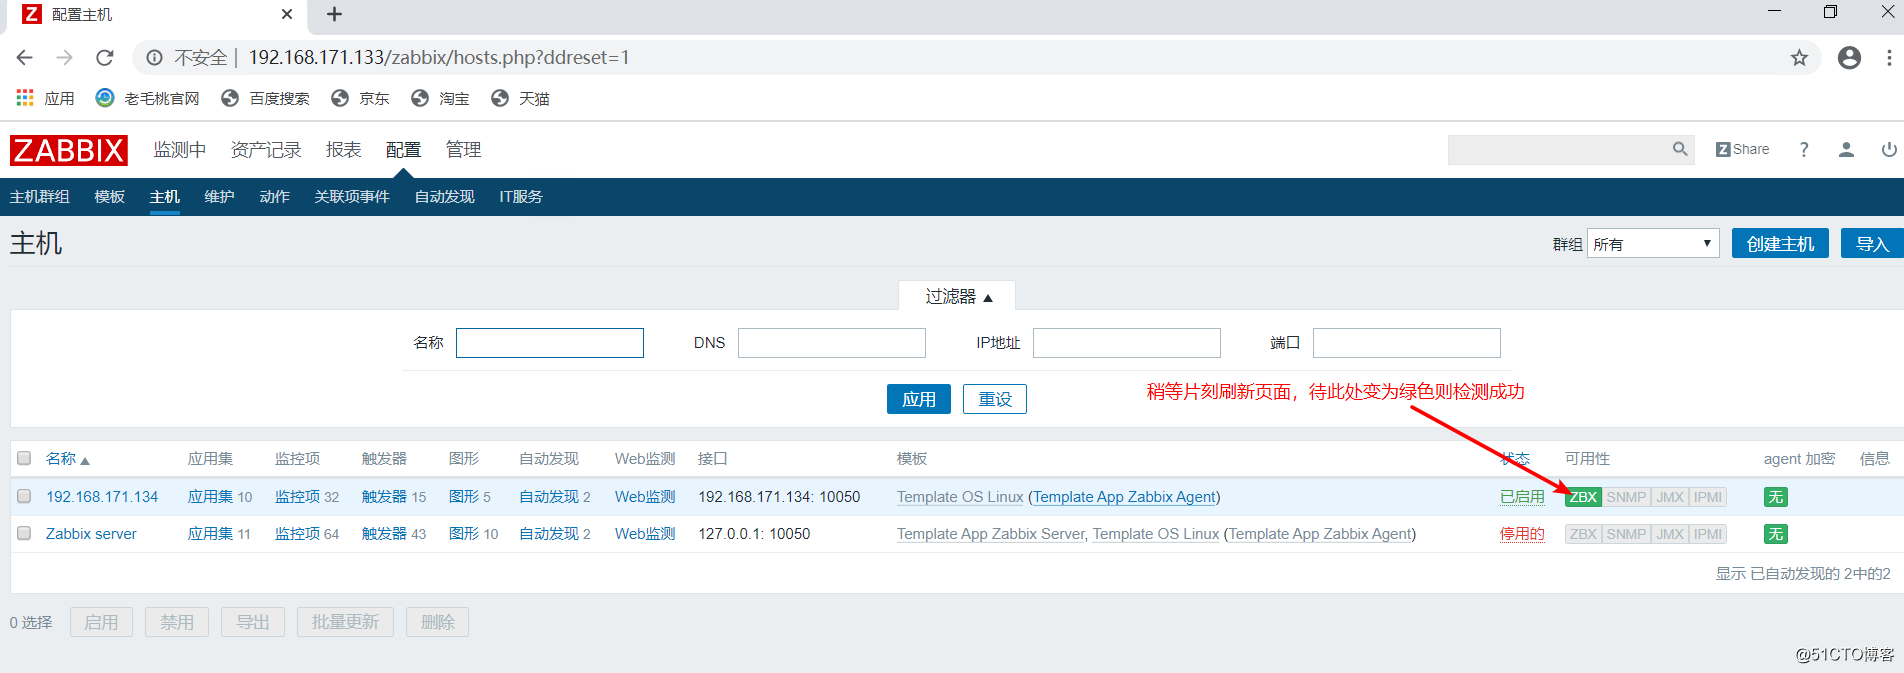 Zabbix monitoring and implementation of e-mail clients, micro-channel alarm